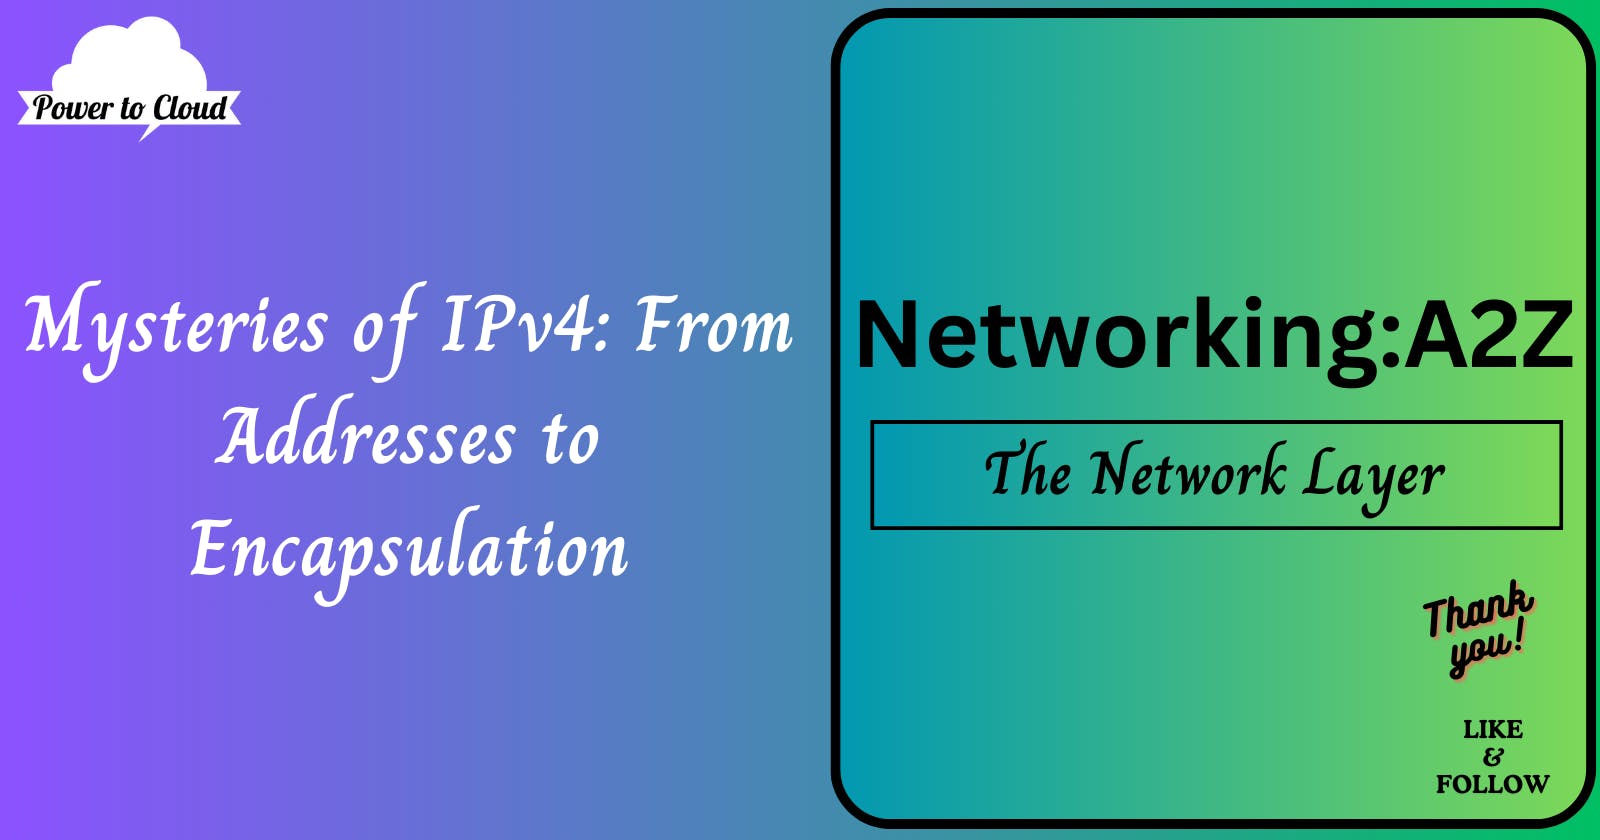 2.3 Mysteries of IPv4: From Addresses to Encapsulation